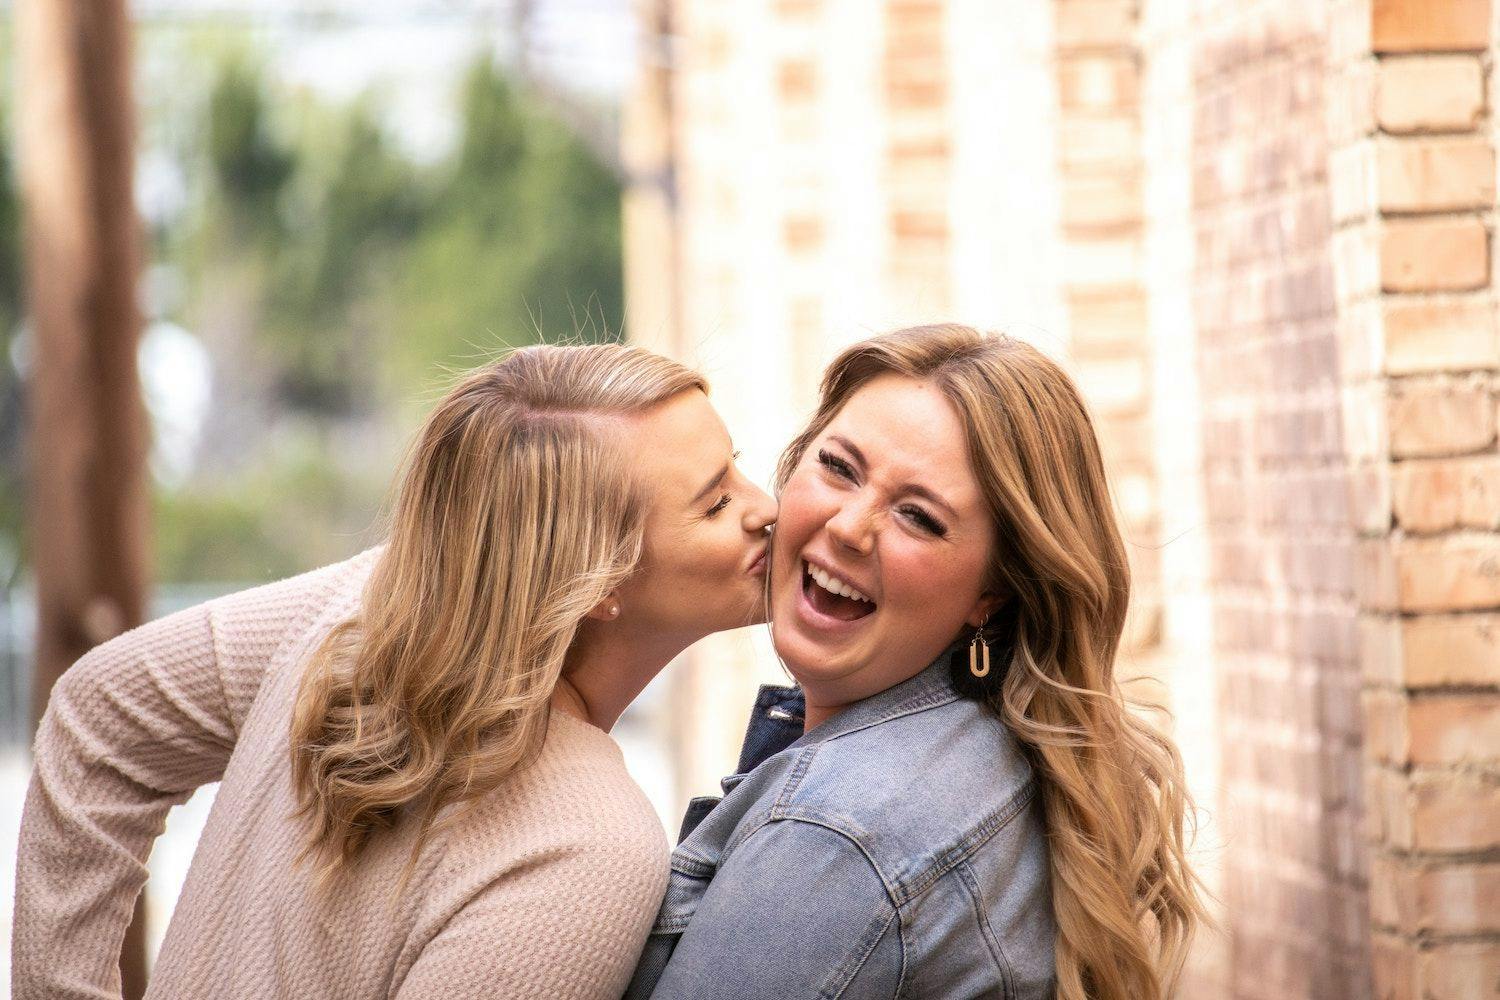 Woman kissing another woman on the cheeks who has a wide smile. 